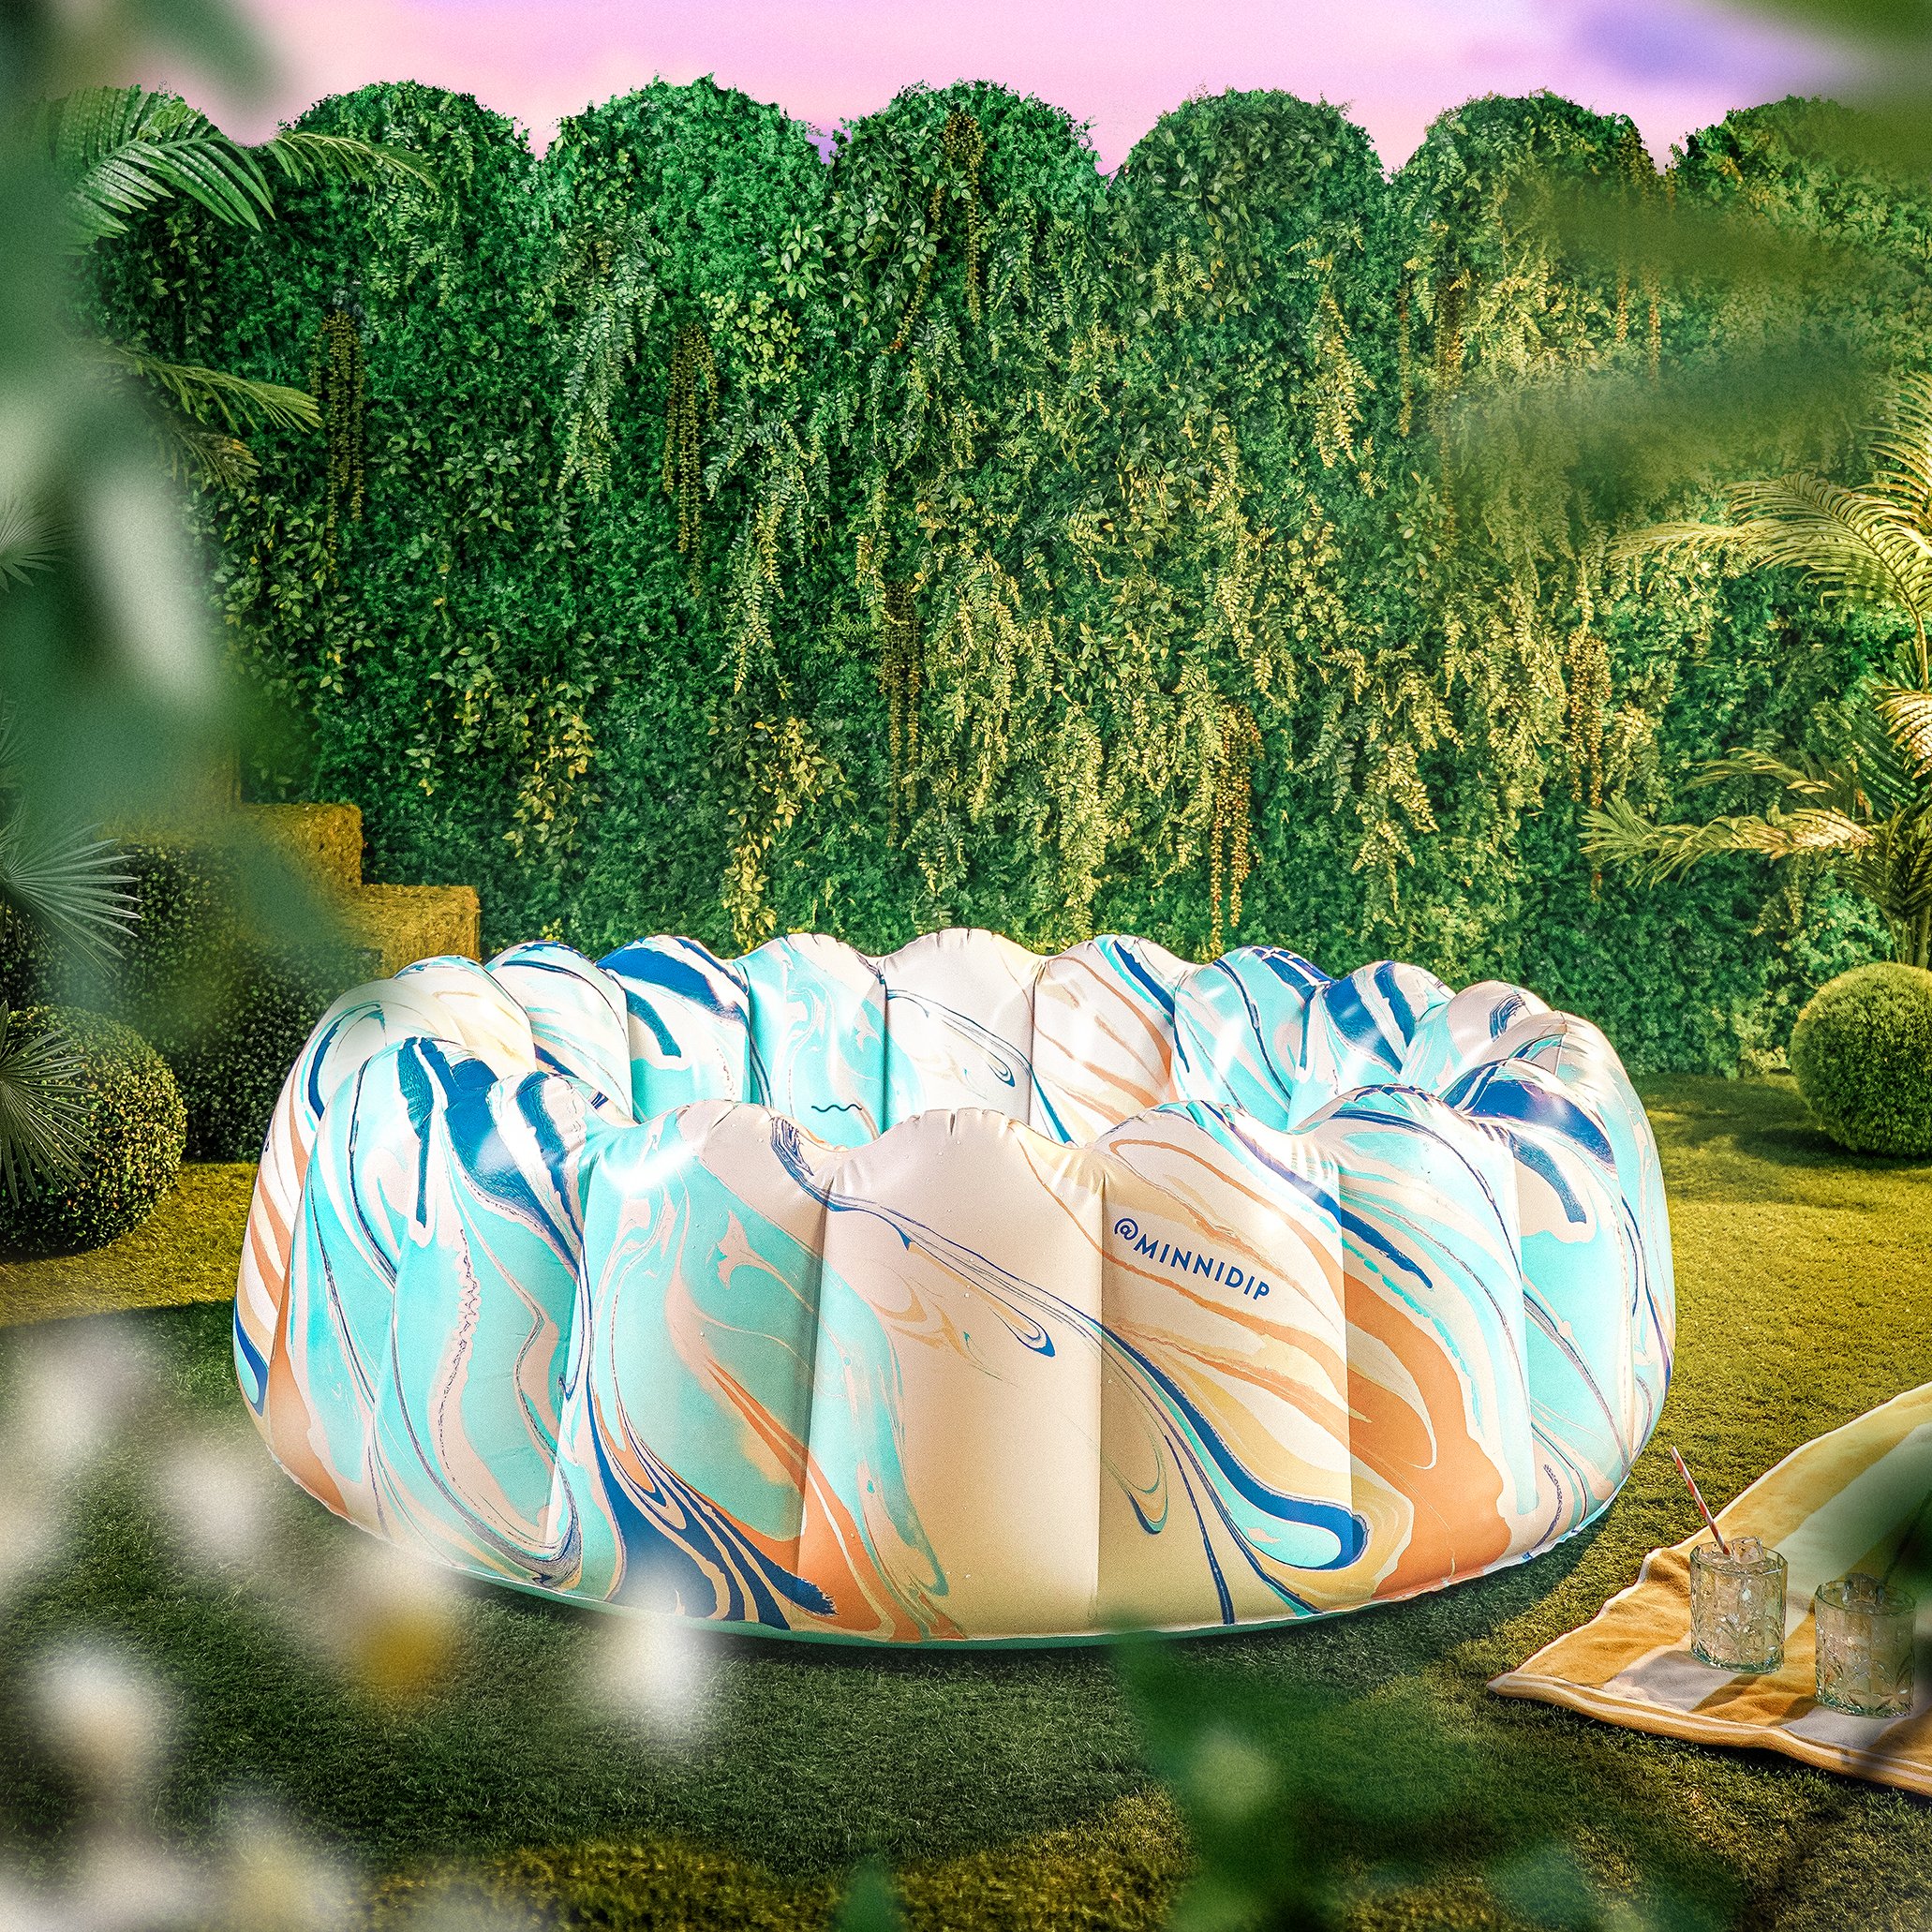 the OMBRÉ ALL DAY luxe inflatable pool — MINNIDIP LUXE INFLATABLE 